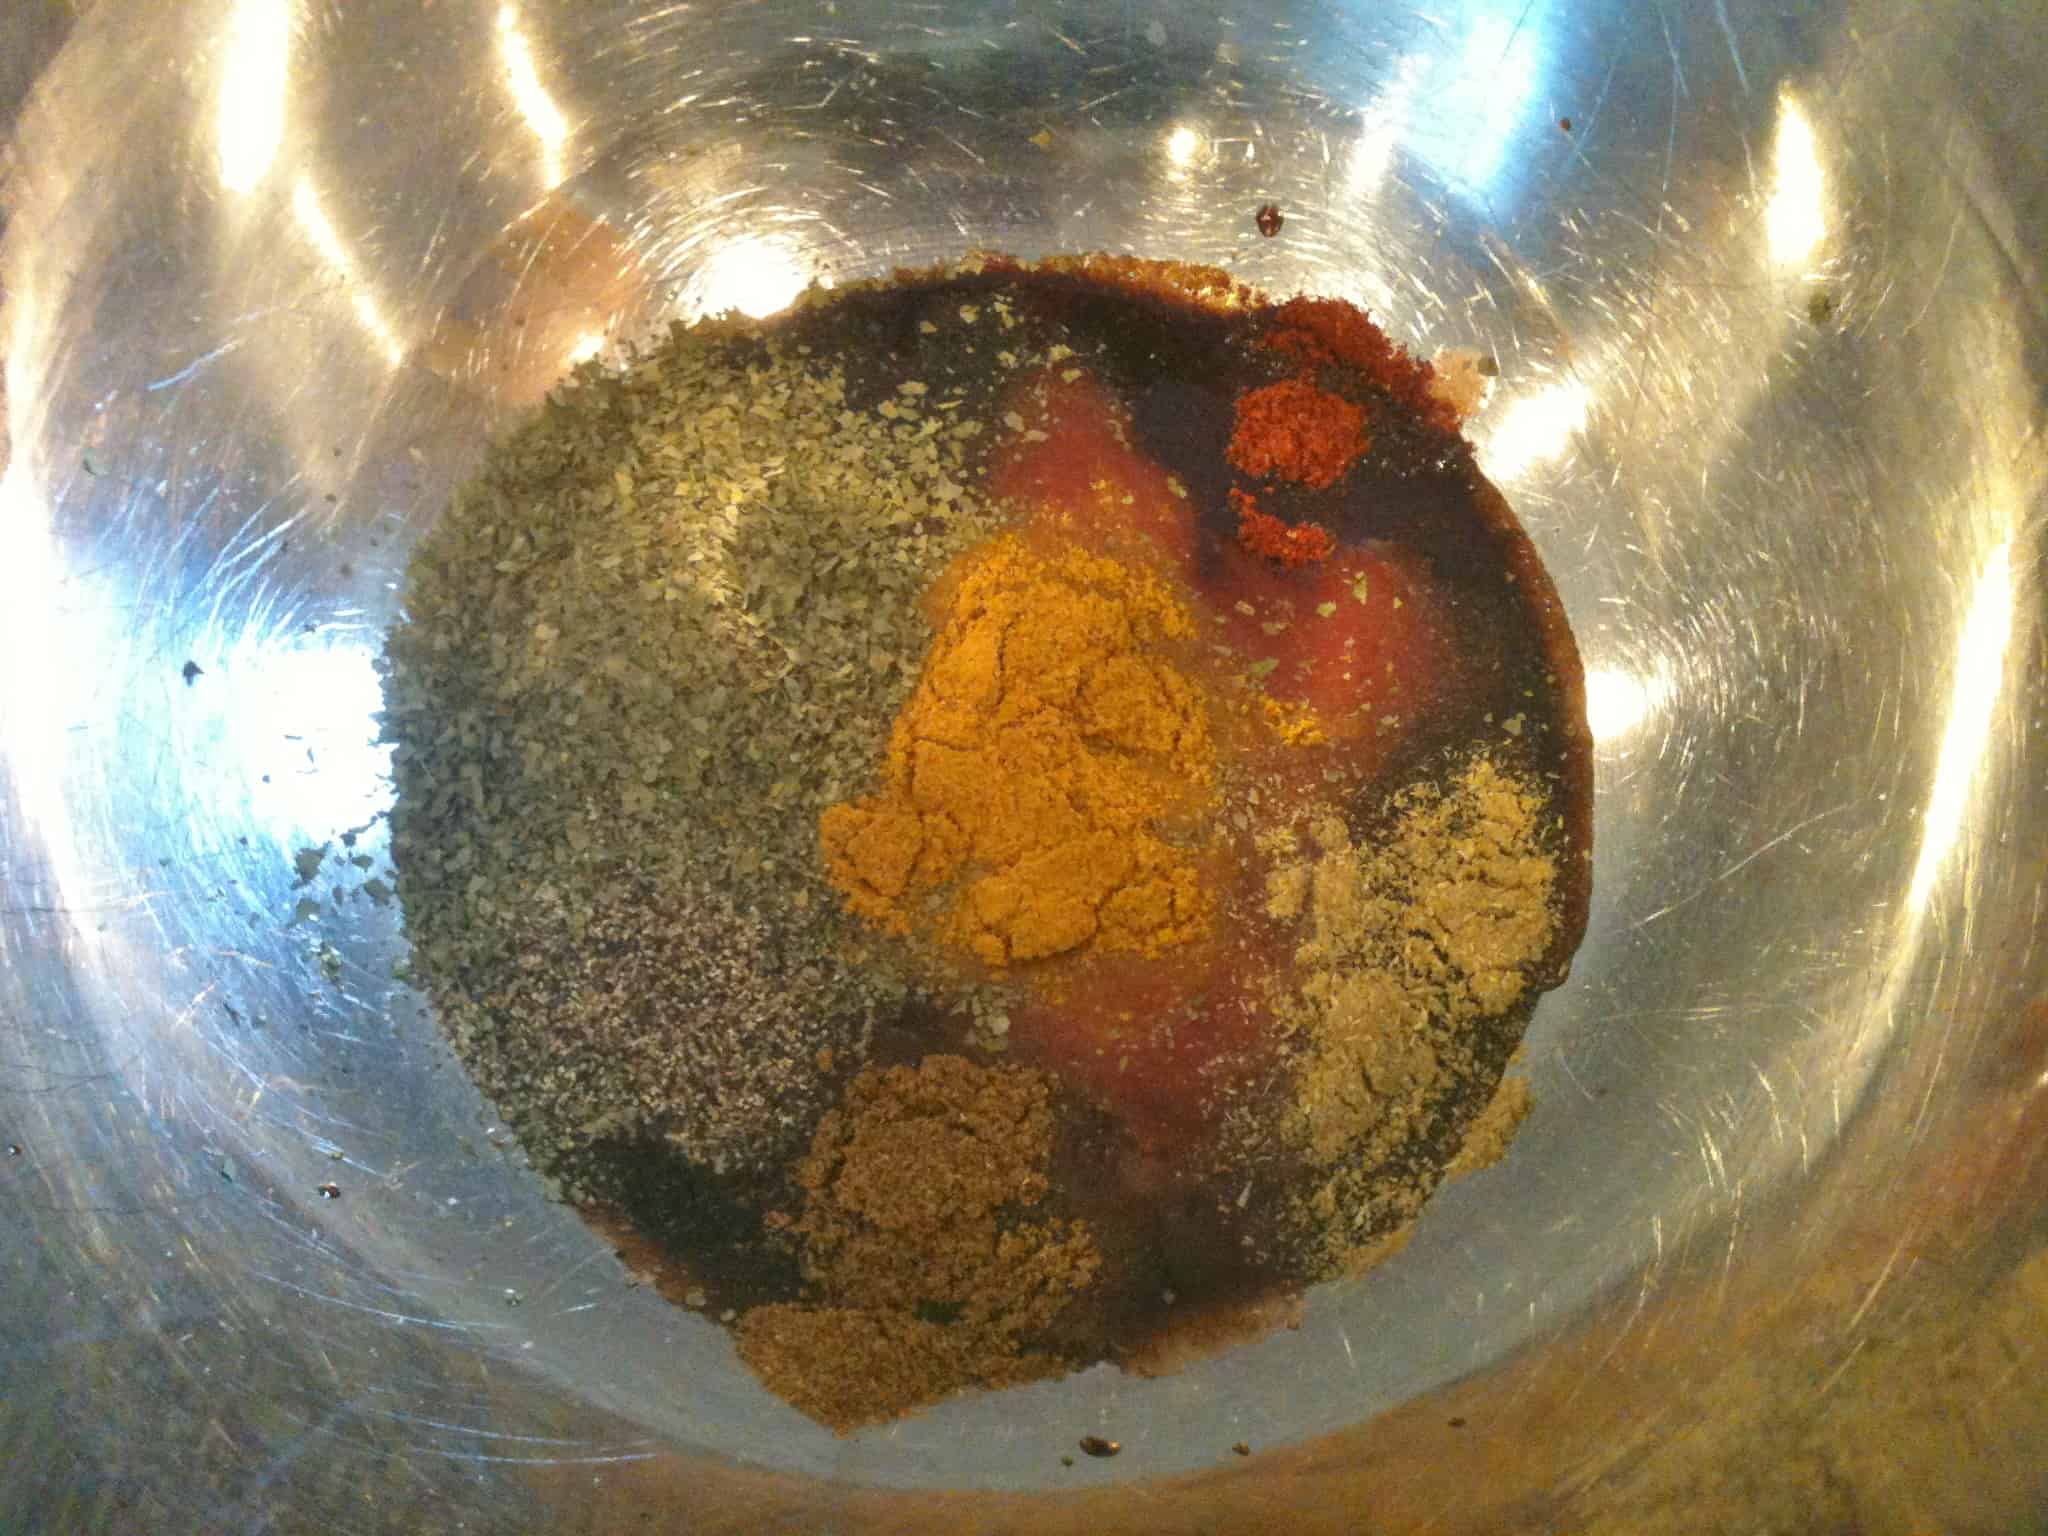 Indian spices for yogurt marinade